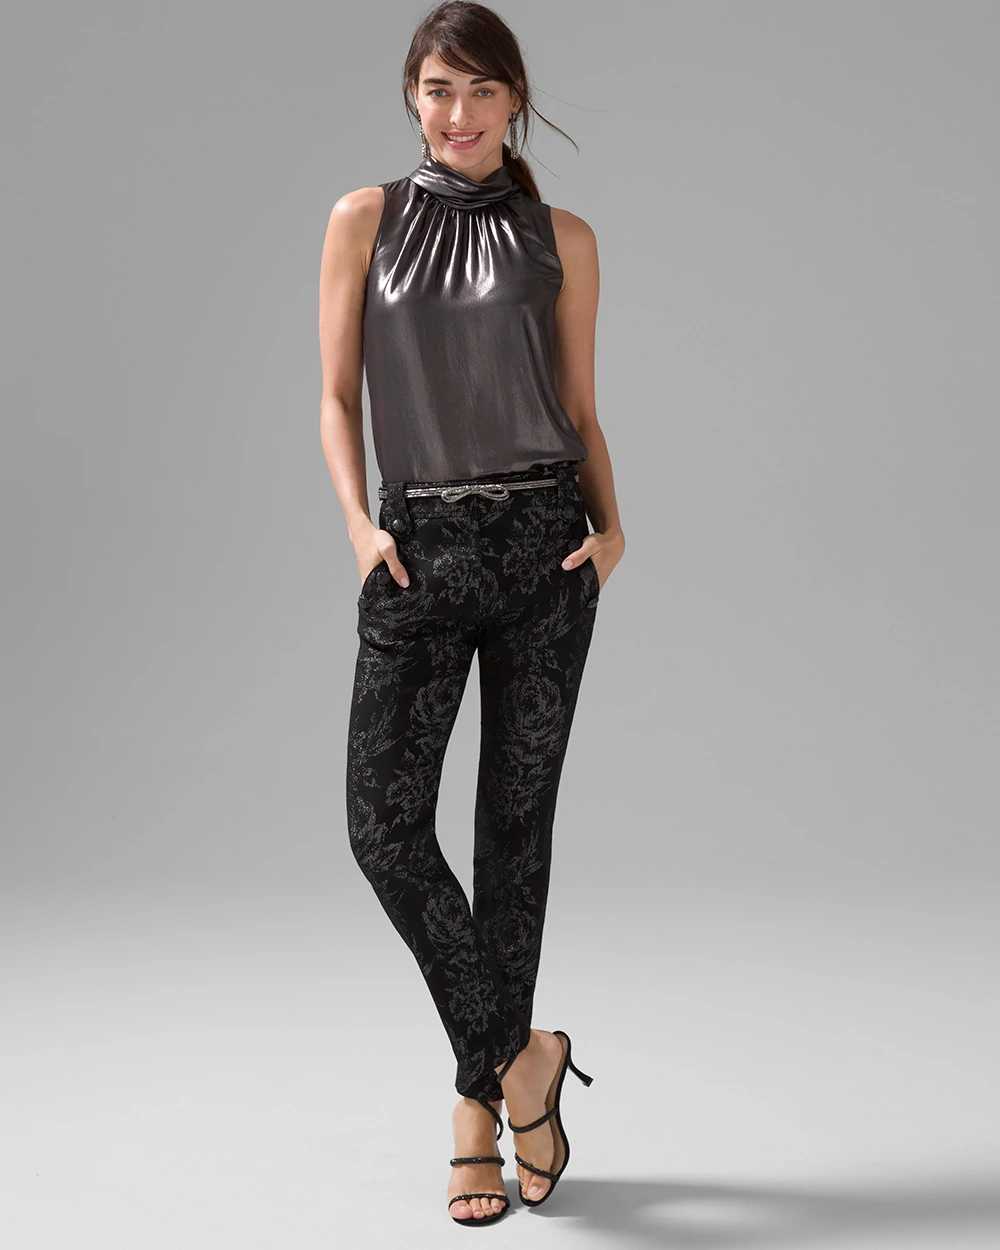 WHBM® Jolie Button Straight Luxe Stretch Pant